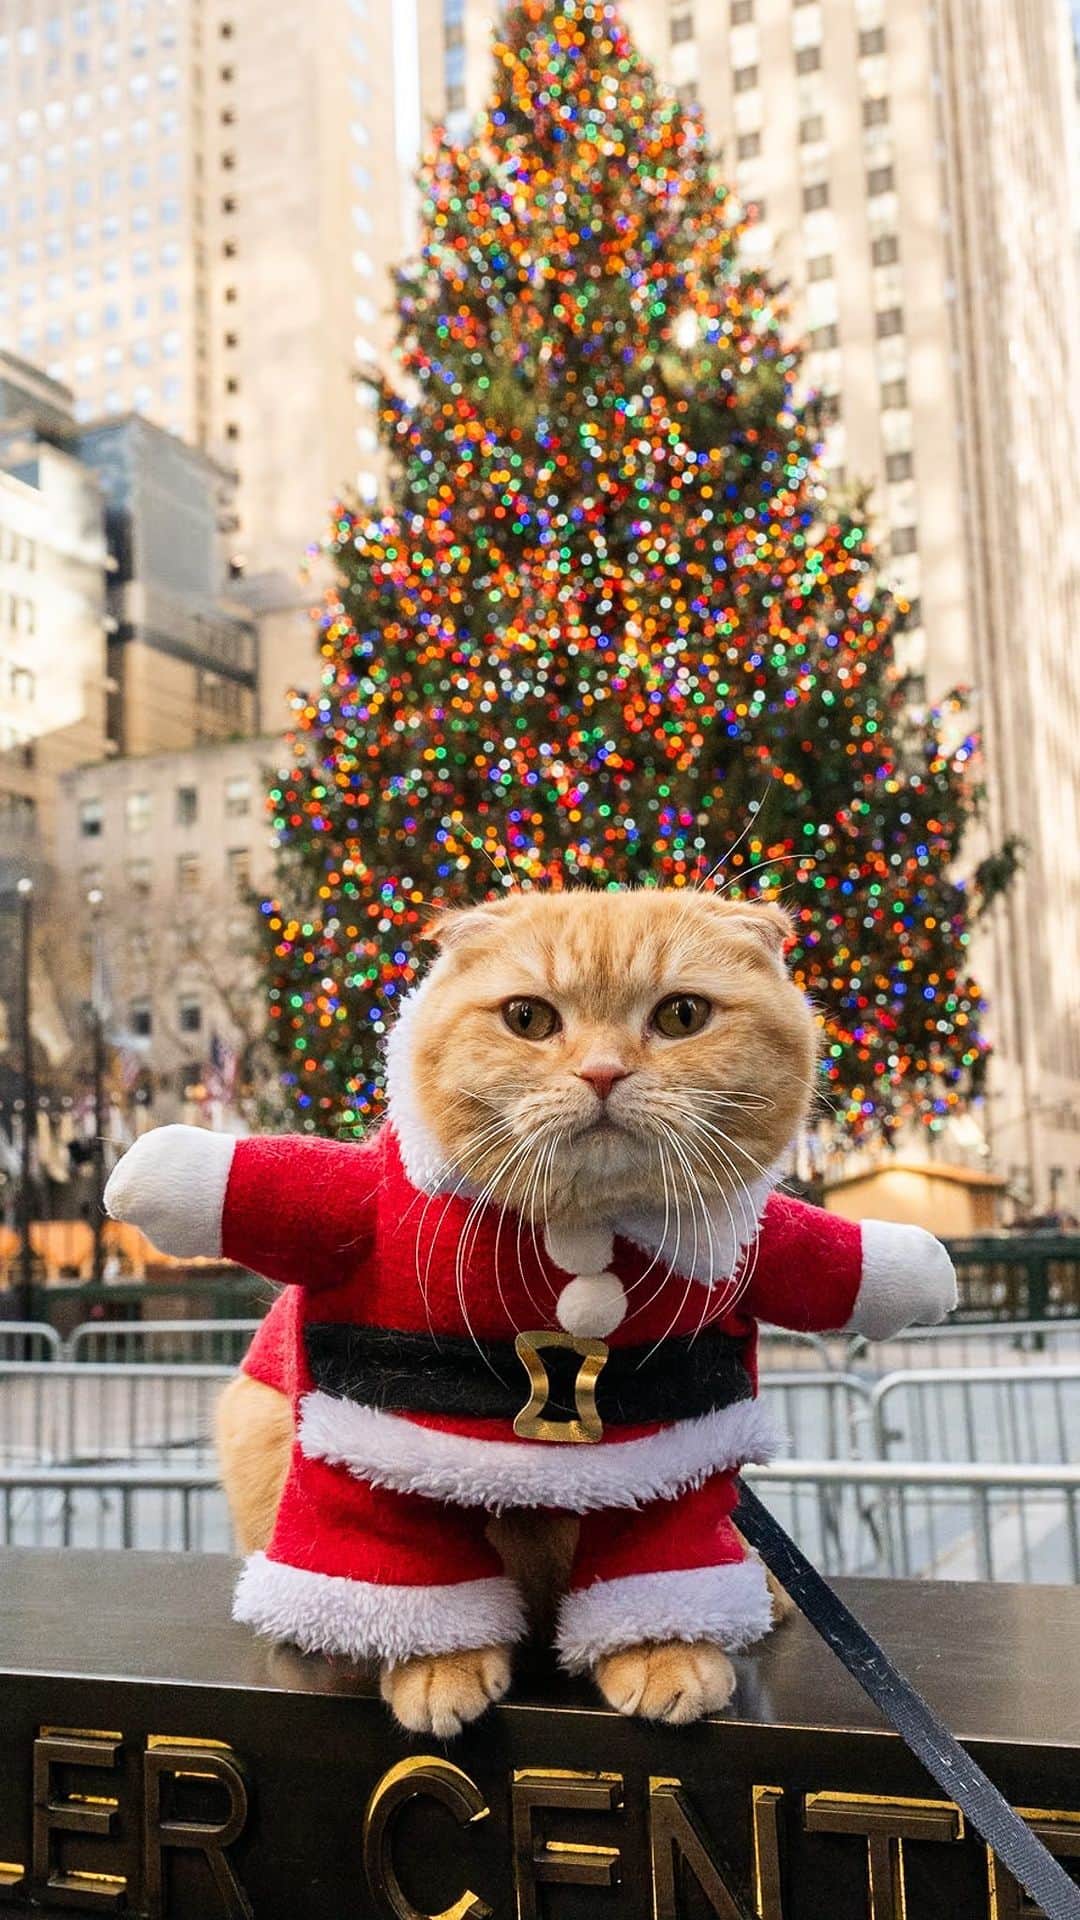 The Dogistのインスタグラム：「Mocha & Spongecake, British Shorthair & Scottish Fold, Rockefeller Center, New York, NY • “I know dogs are very easygoing, but cats have their own personalities. If you want to gain their trust, you need to work on it. But once you have earned it, it’s amazing. It’s unbreakable.” @spongecake_thescottishfold   Merry Christmas! 🎄 Should Elias relaunch @thecatist?」